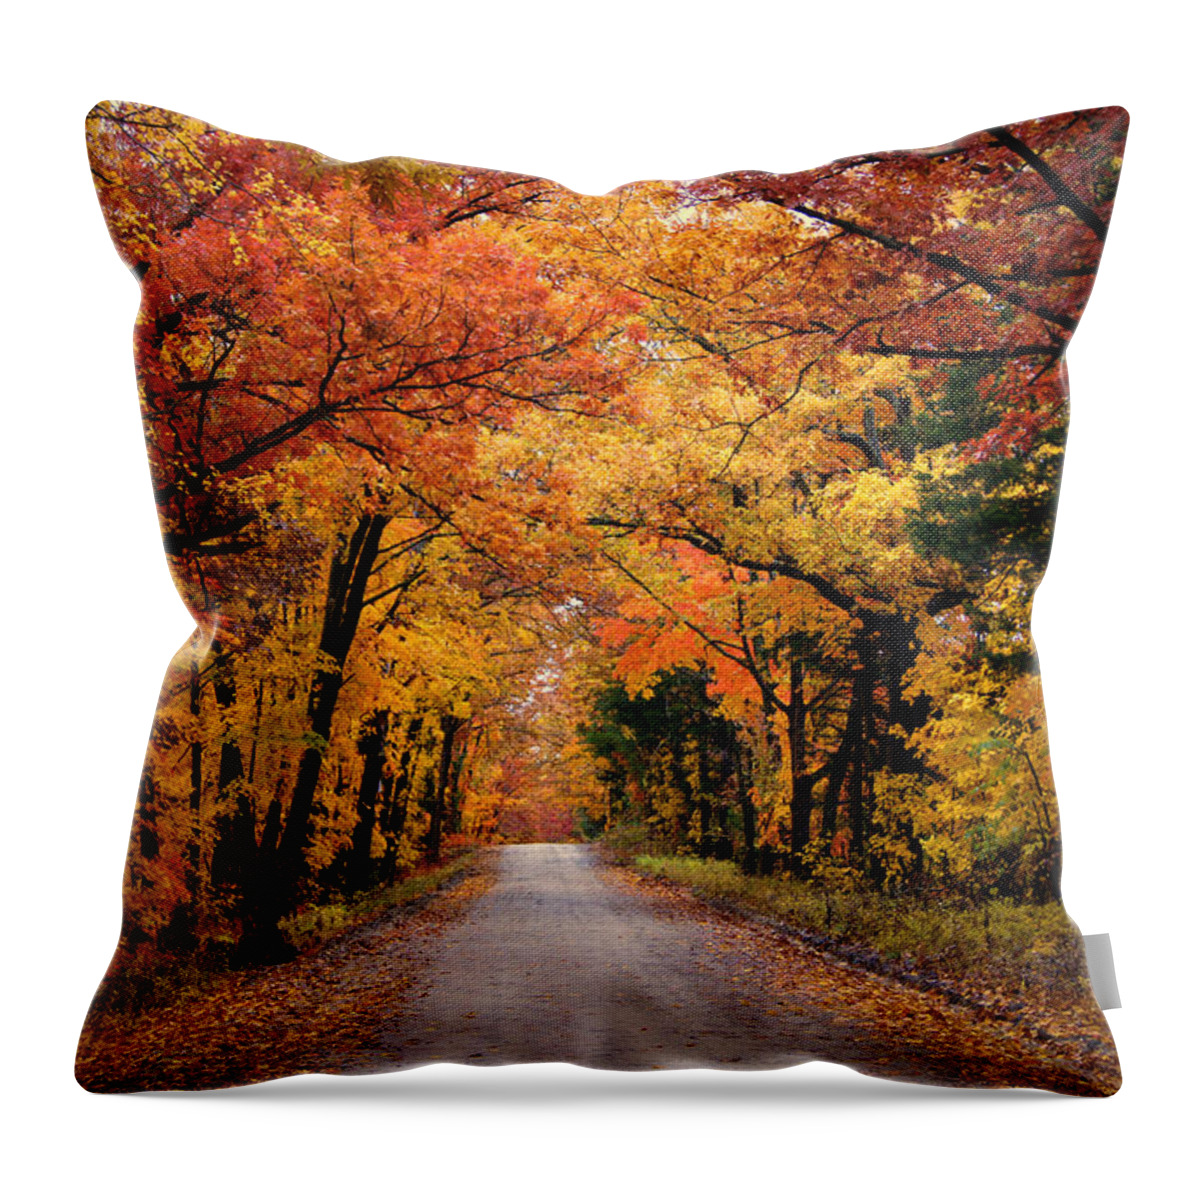 Fall Foliage Throw Pillow featuring the photograph October Road by Cricket Hackmann